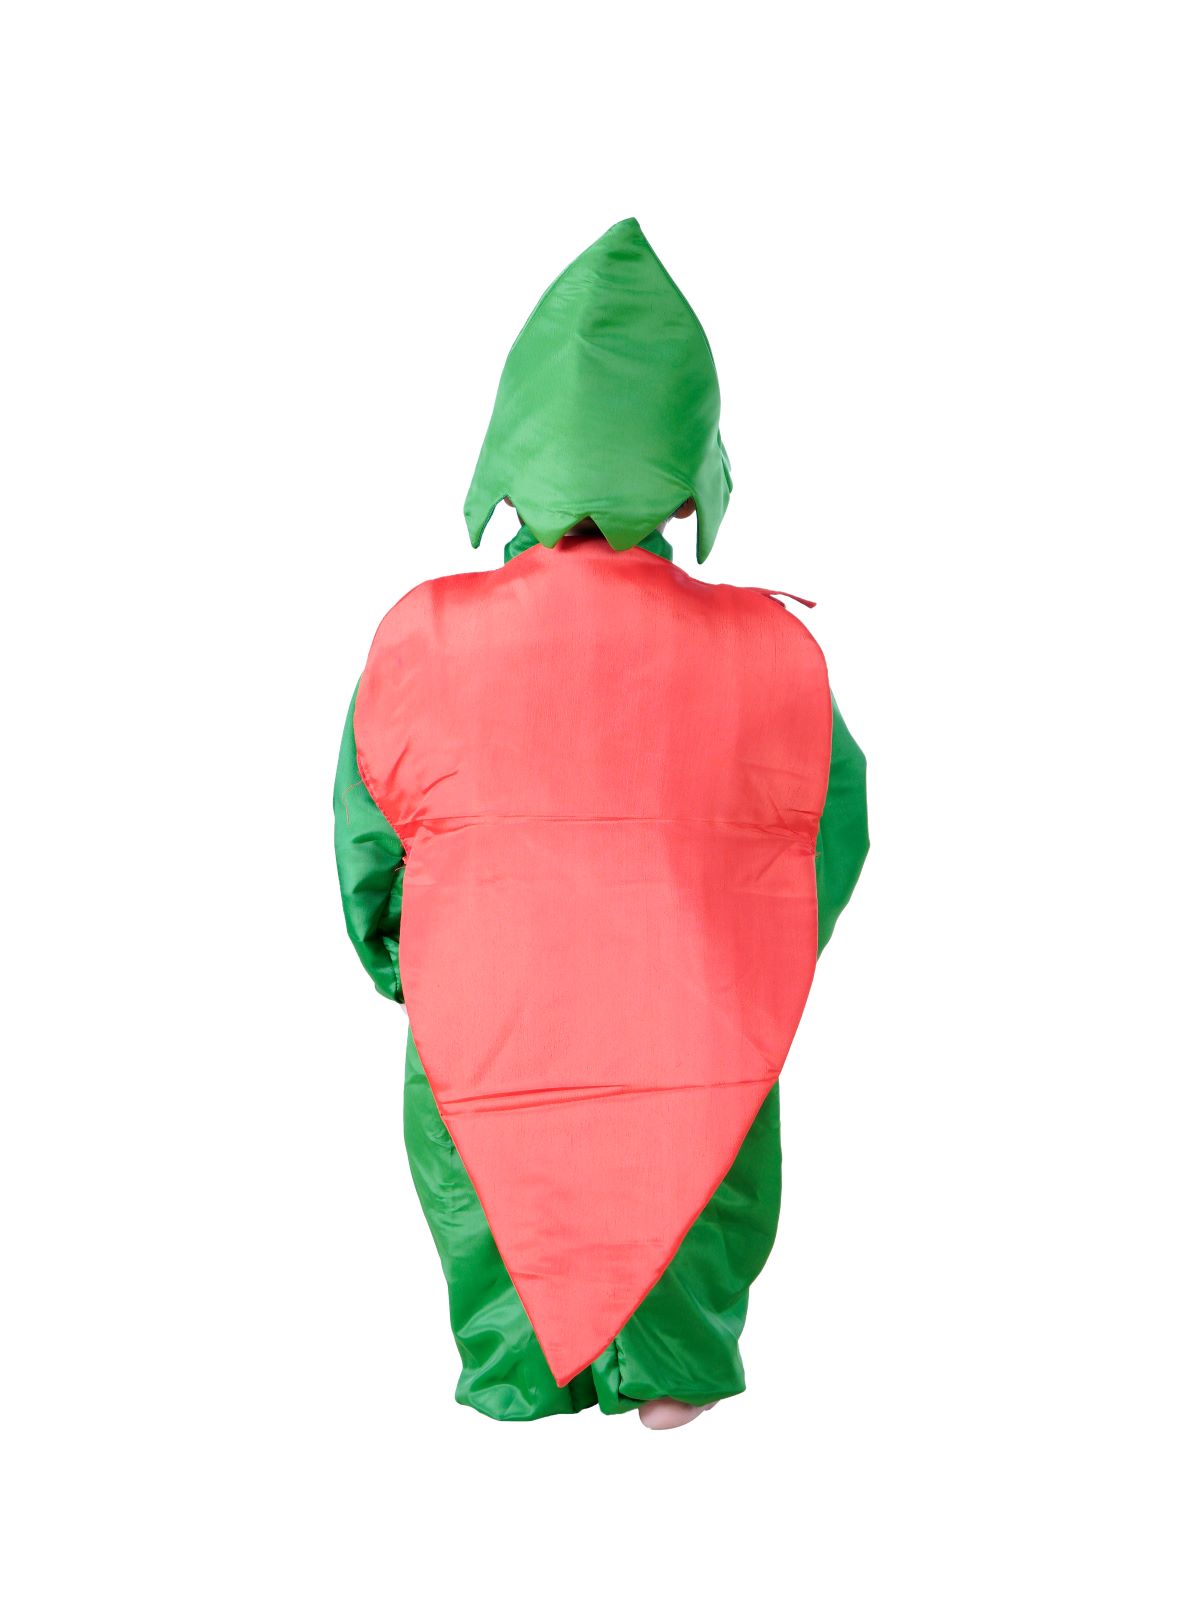 The Best Vegetable and Fruit Halloween Costumes - Local Roots NYC